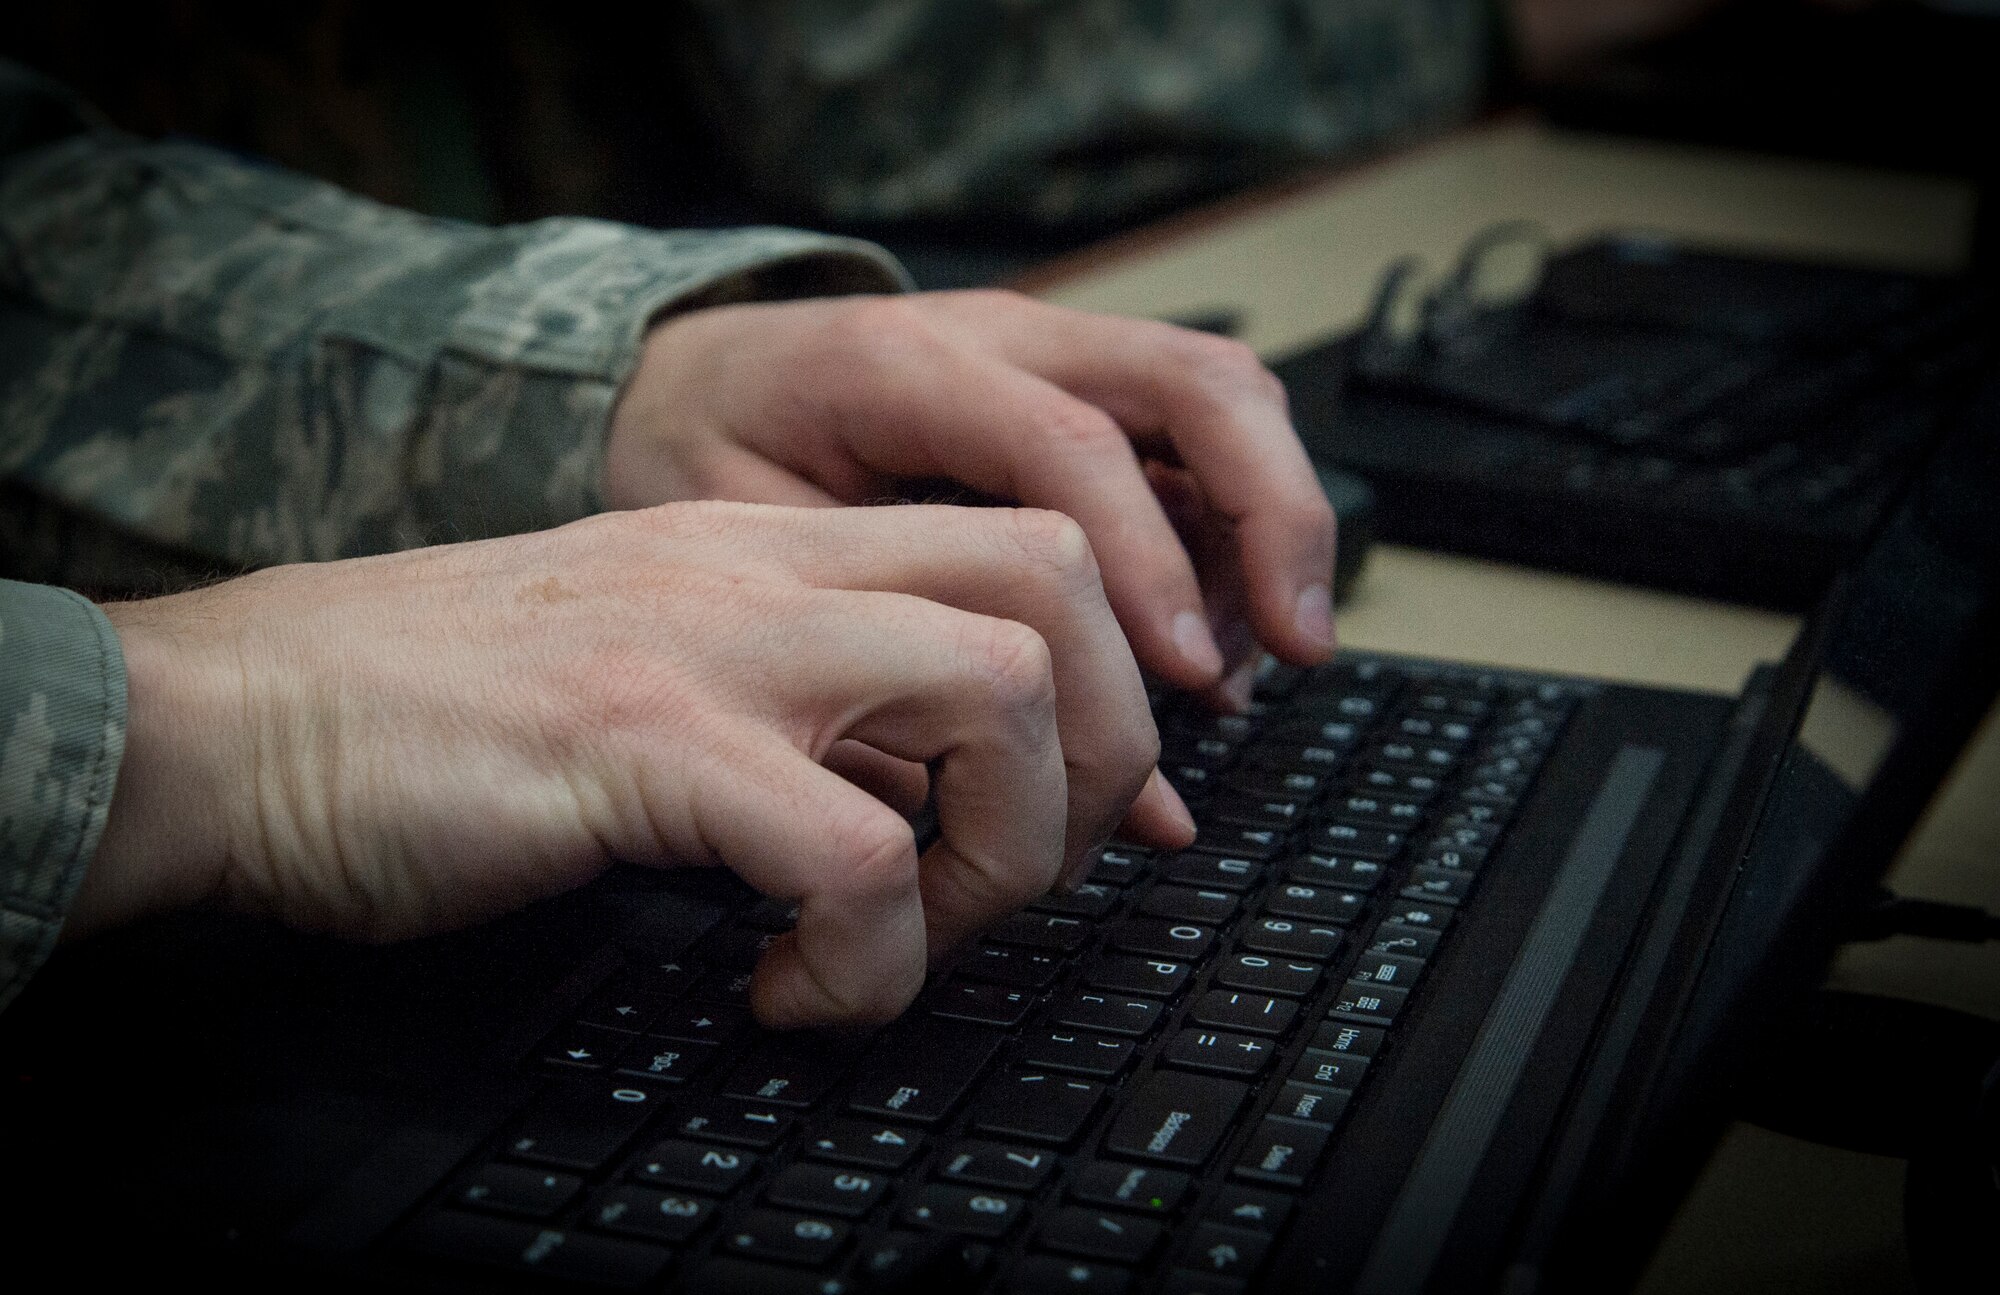 An Airman types on his computer during the Cybersecurity Foundry Course at MacDill Air Force Base, Fla., March 9, 2018. Course instructors taught 100 cyberspace students various cybersecurity functions, processes, procedures and data analysis skills to further their ability to secure the Air Force Network. (U.S. Air Force photo by Senior Airman Mariette Adams)